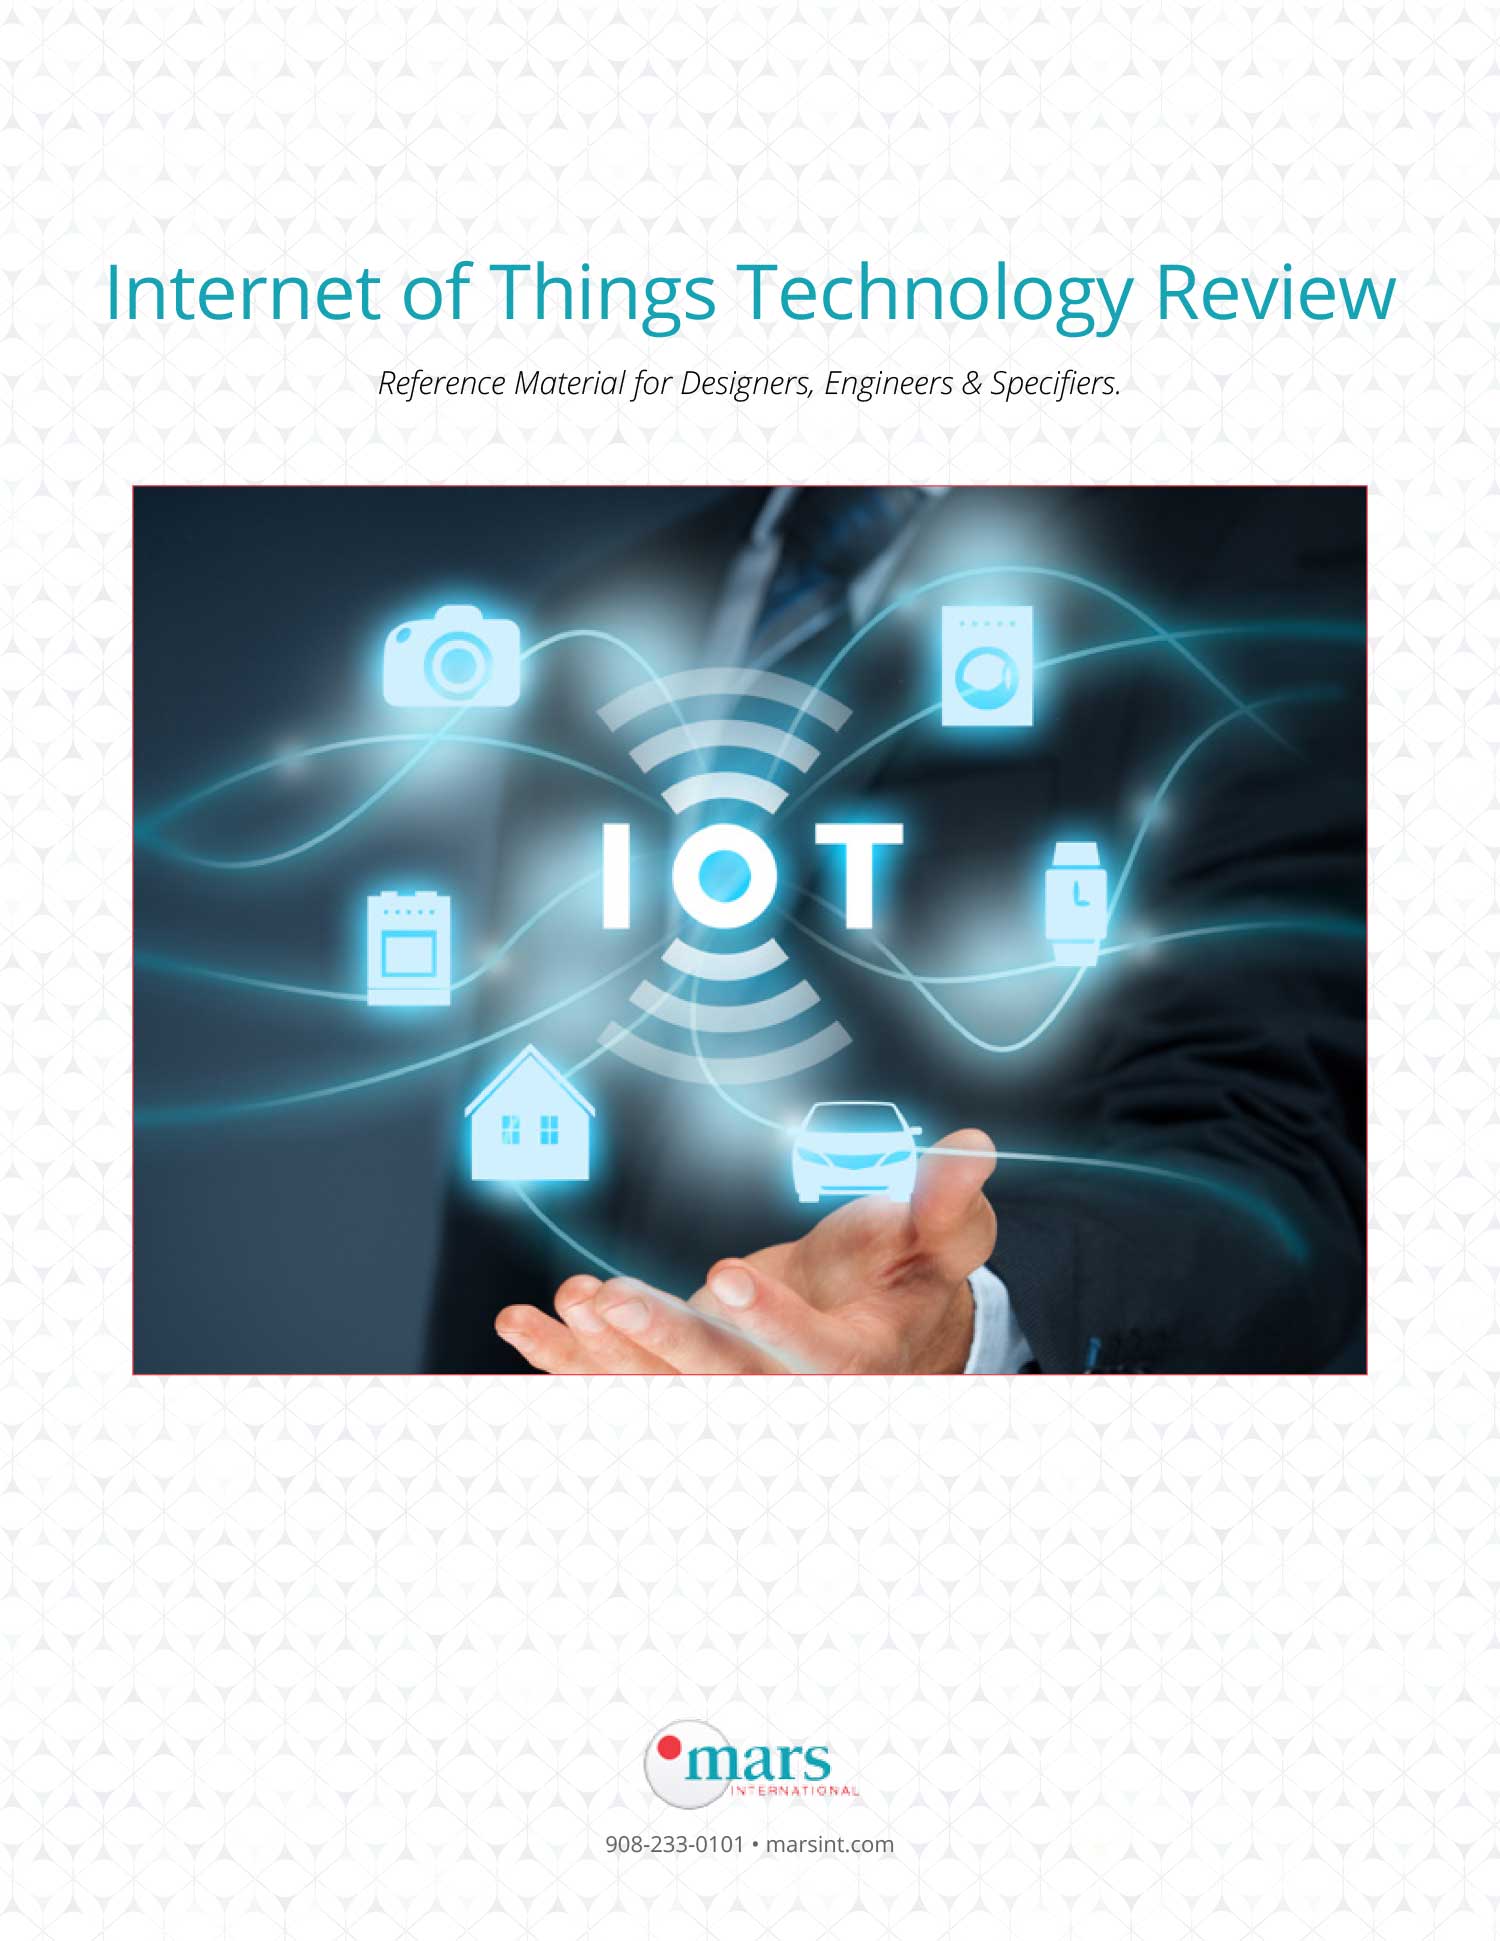 Internet of Things Technology Review